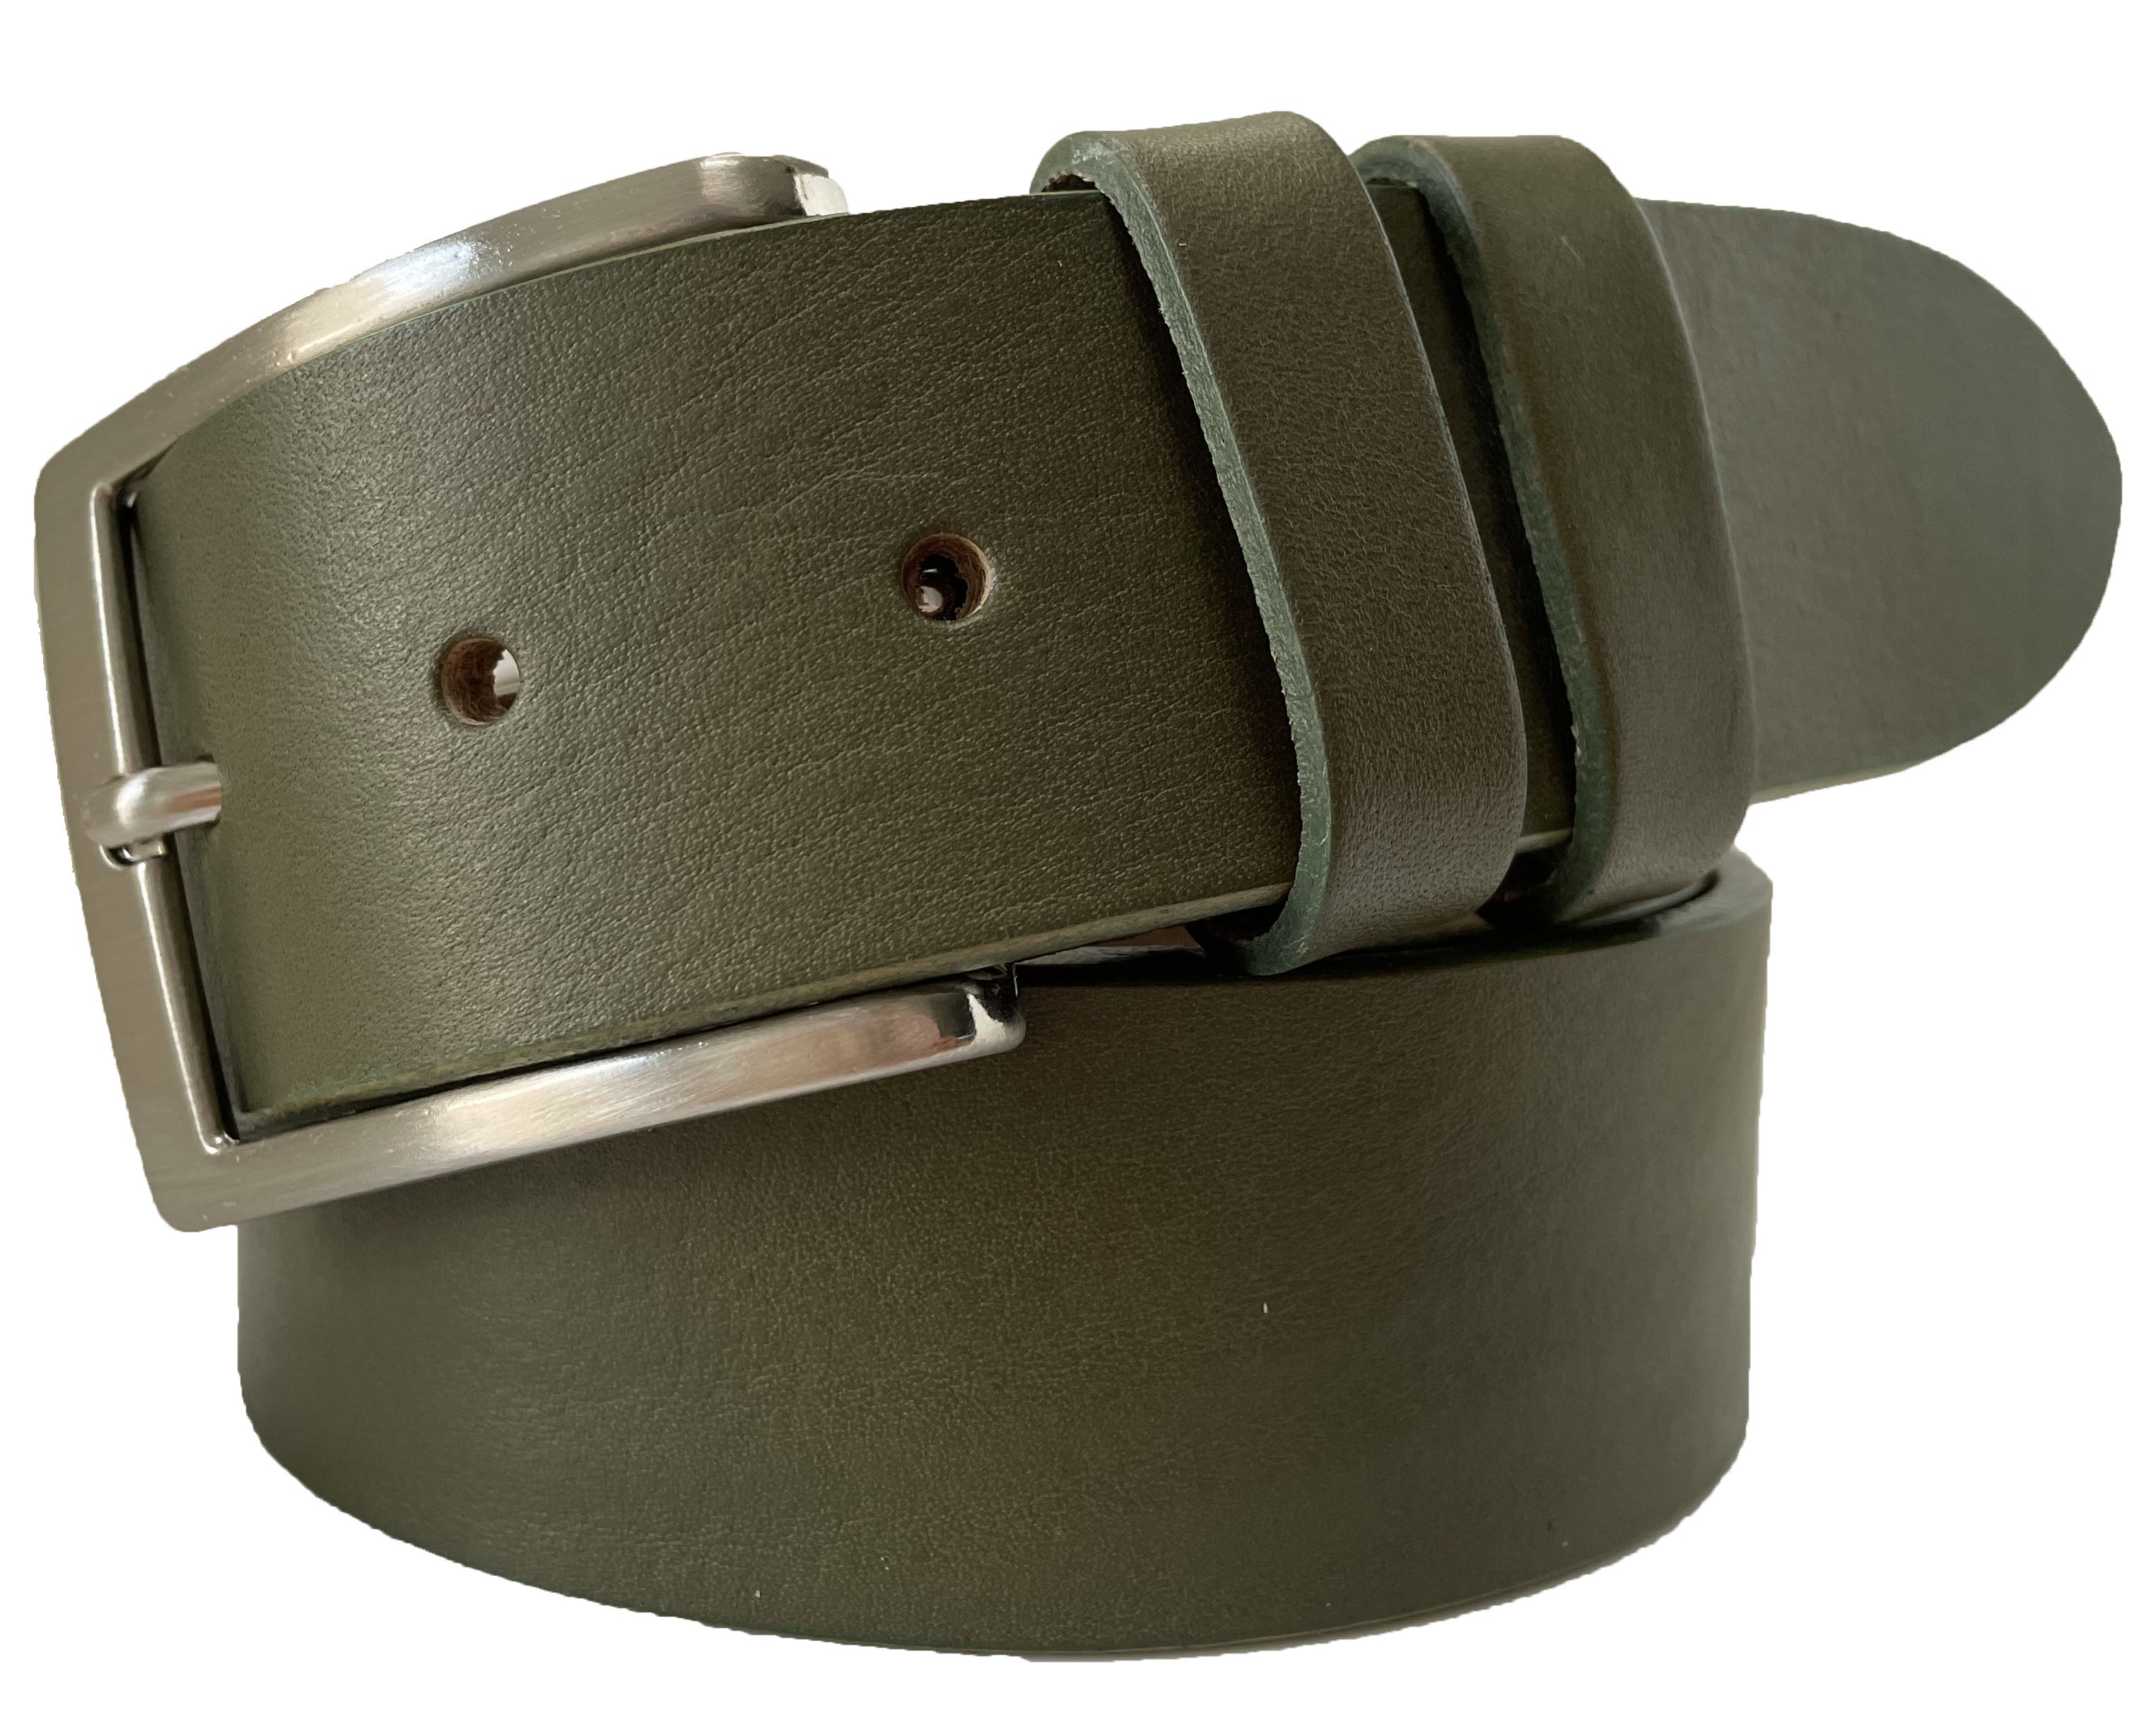 MILITARY GREEN 35MM CLASSIC HIDE LEATHER BELT